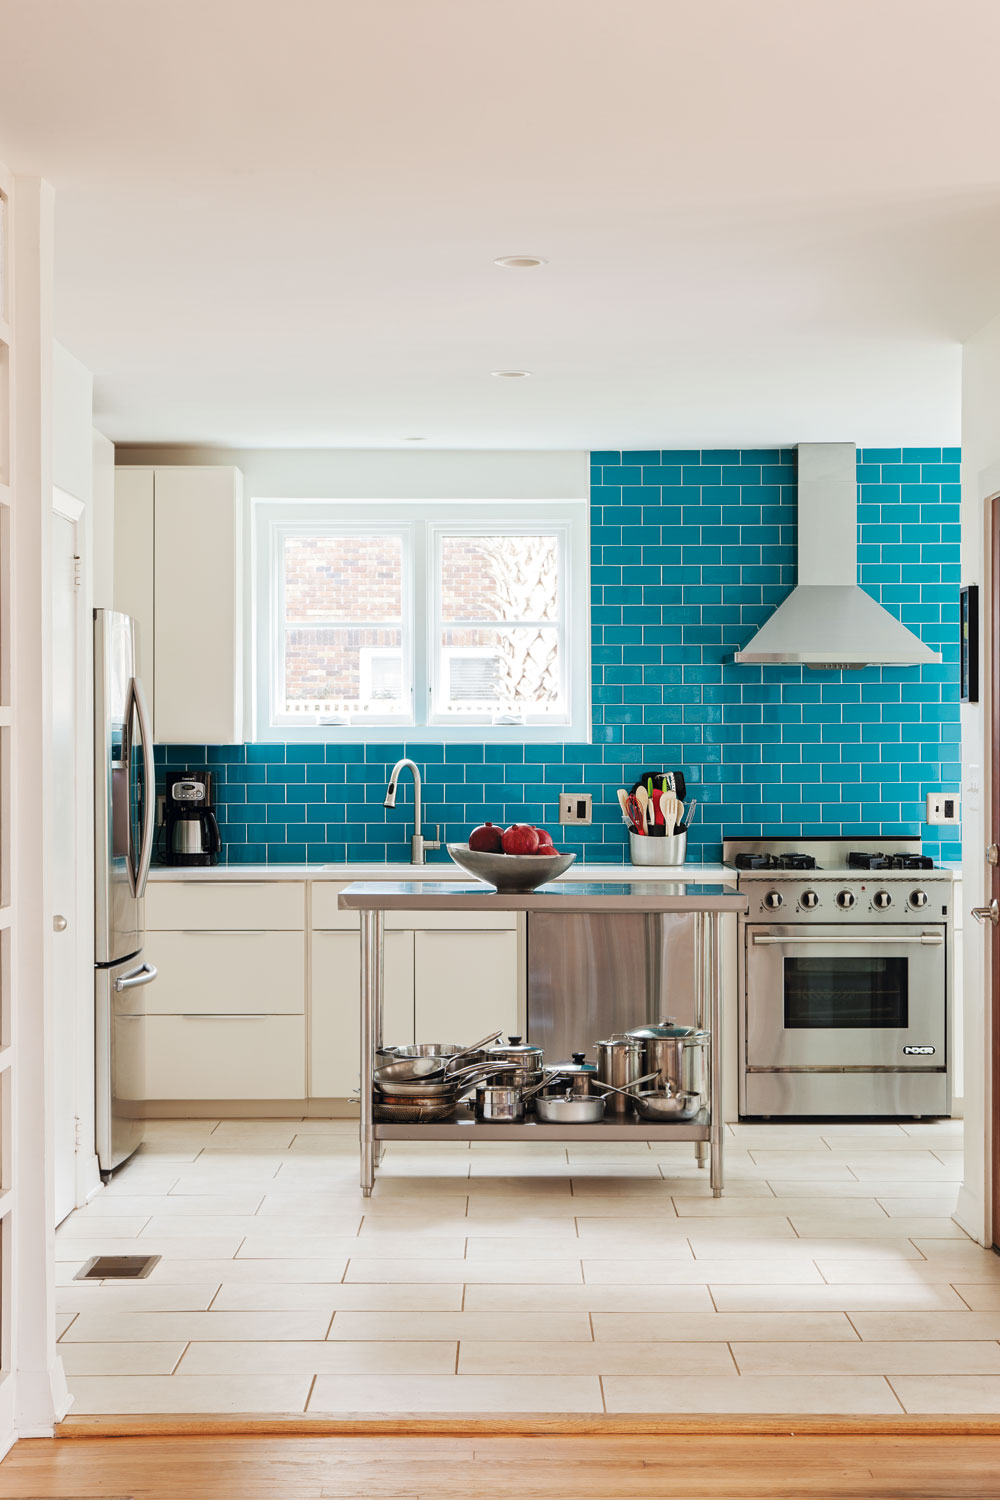 “COAT” d’AZUR: A wall of bright blue subway tile delivers a splash of color to the modernized kitchen, with new stainless steel appliances, custom cabinets, and Daltile countertops.